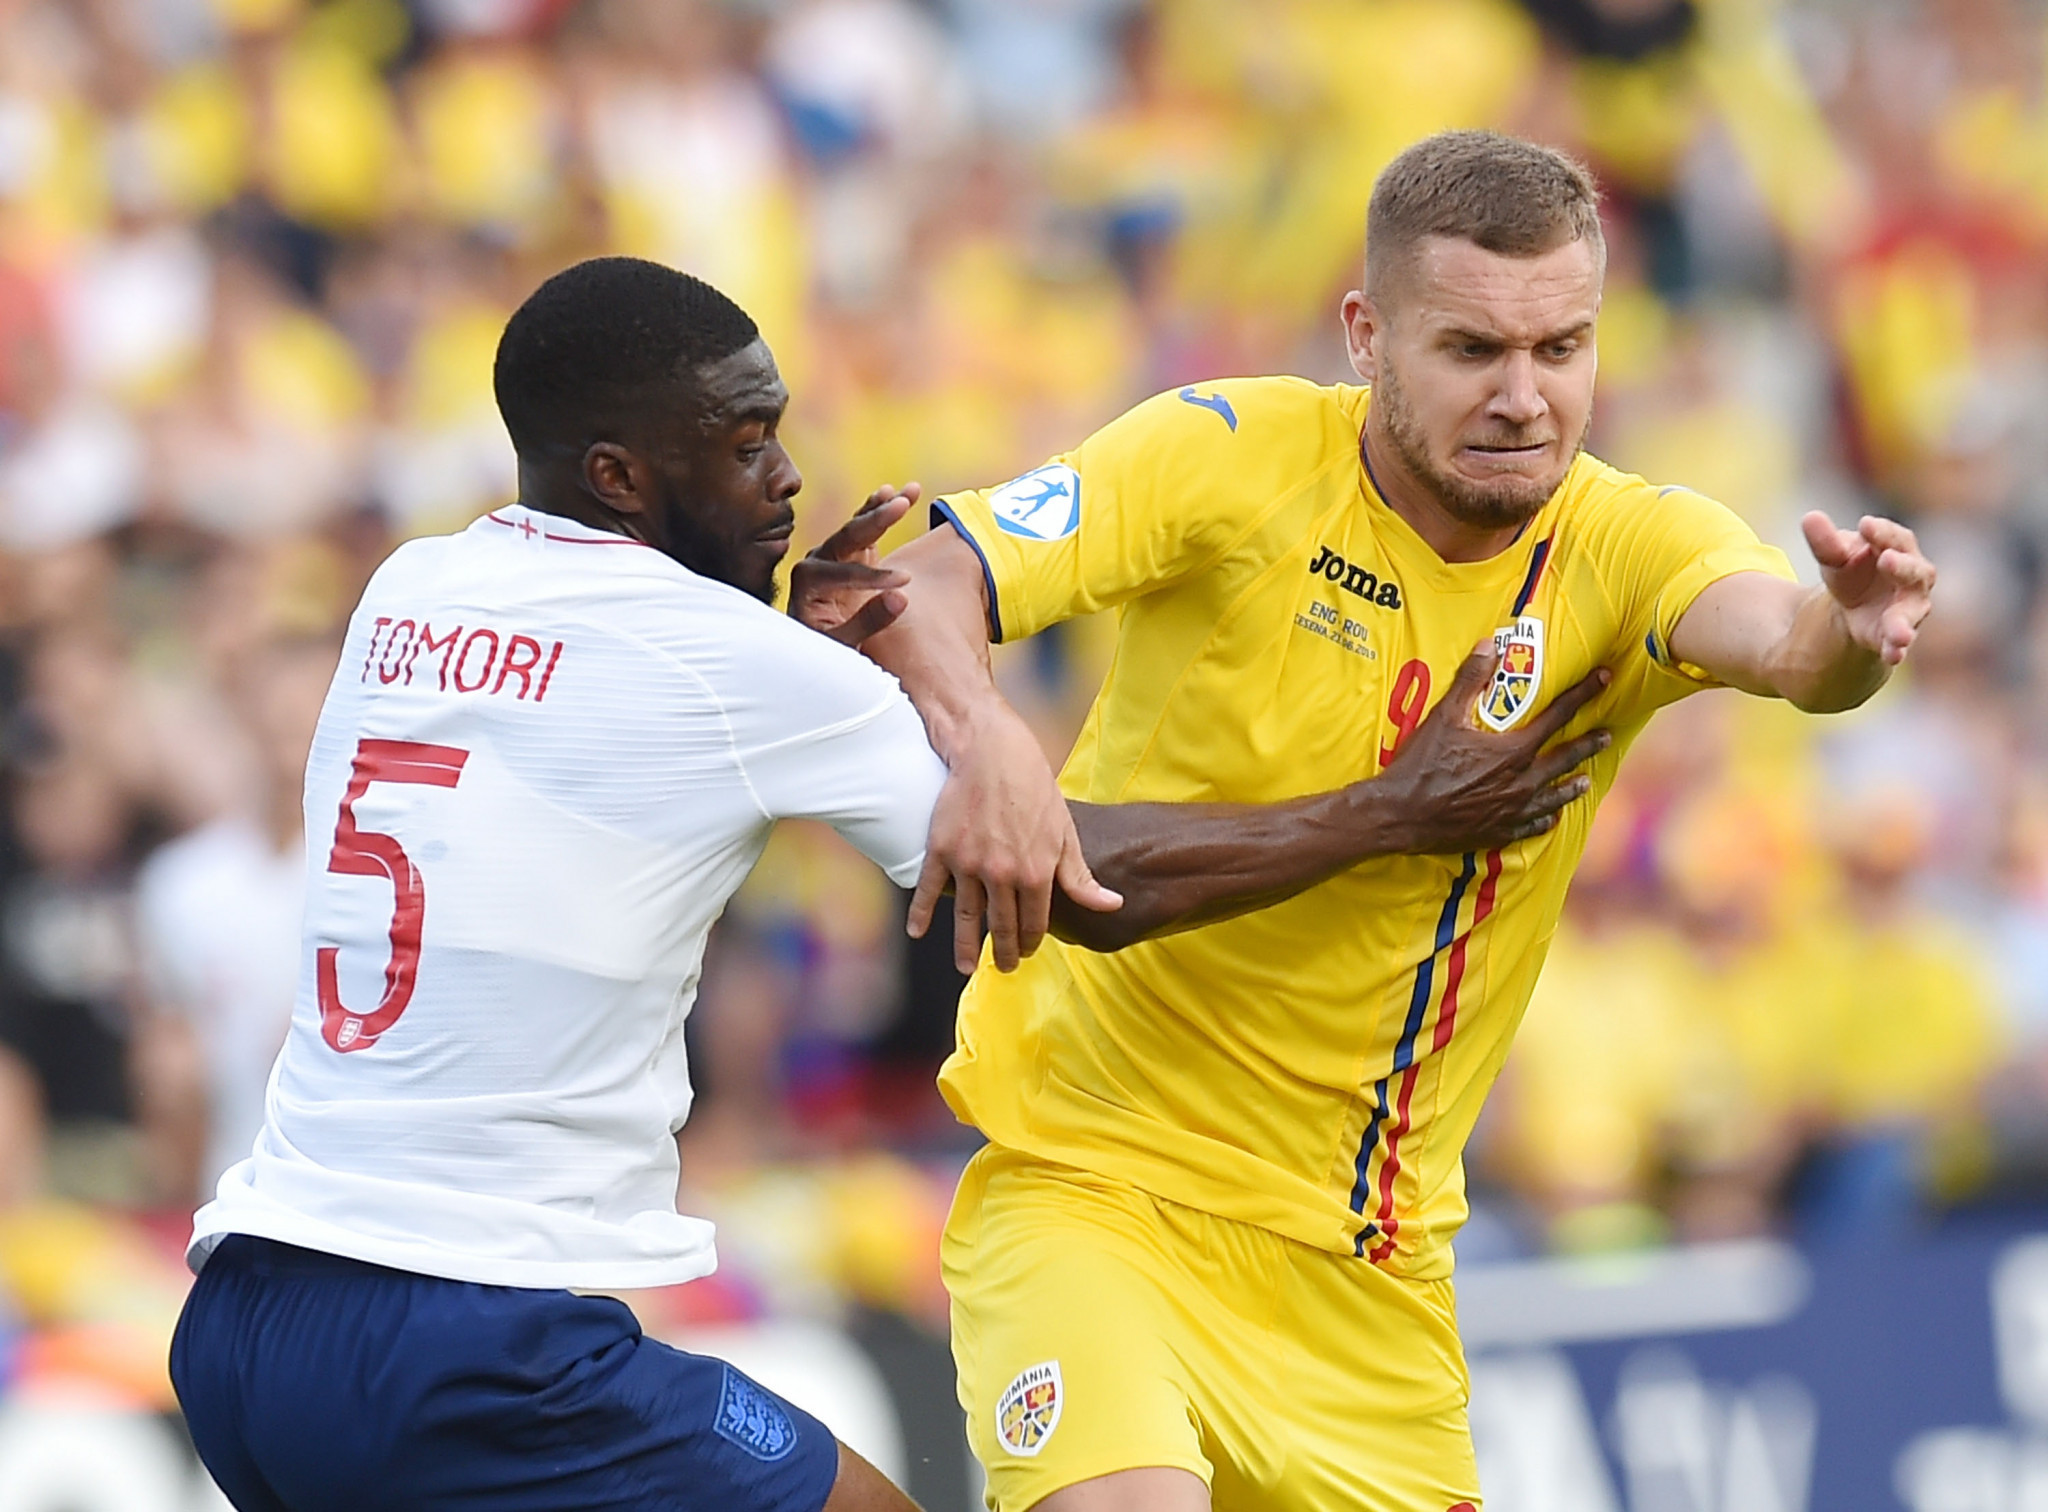 Romania's victory saw England crash out of the tournament ©Getty Images